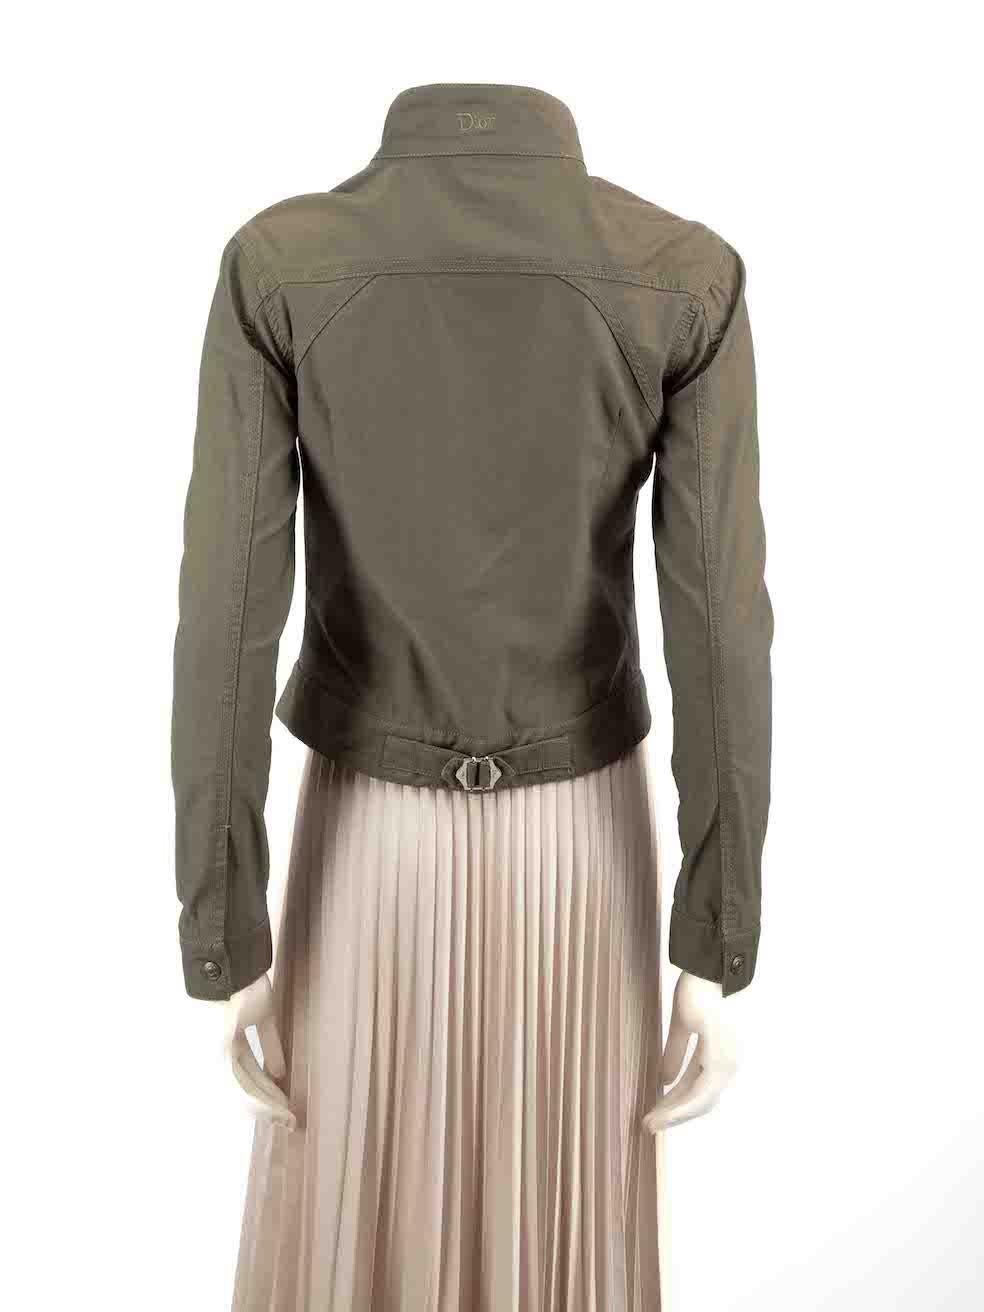 Dior Khaki Zipped High Neck Jacket Size M In Excellent Condition For Sale In London, GB